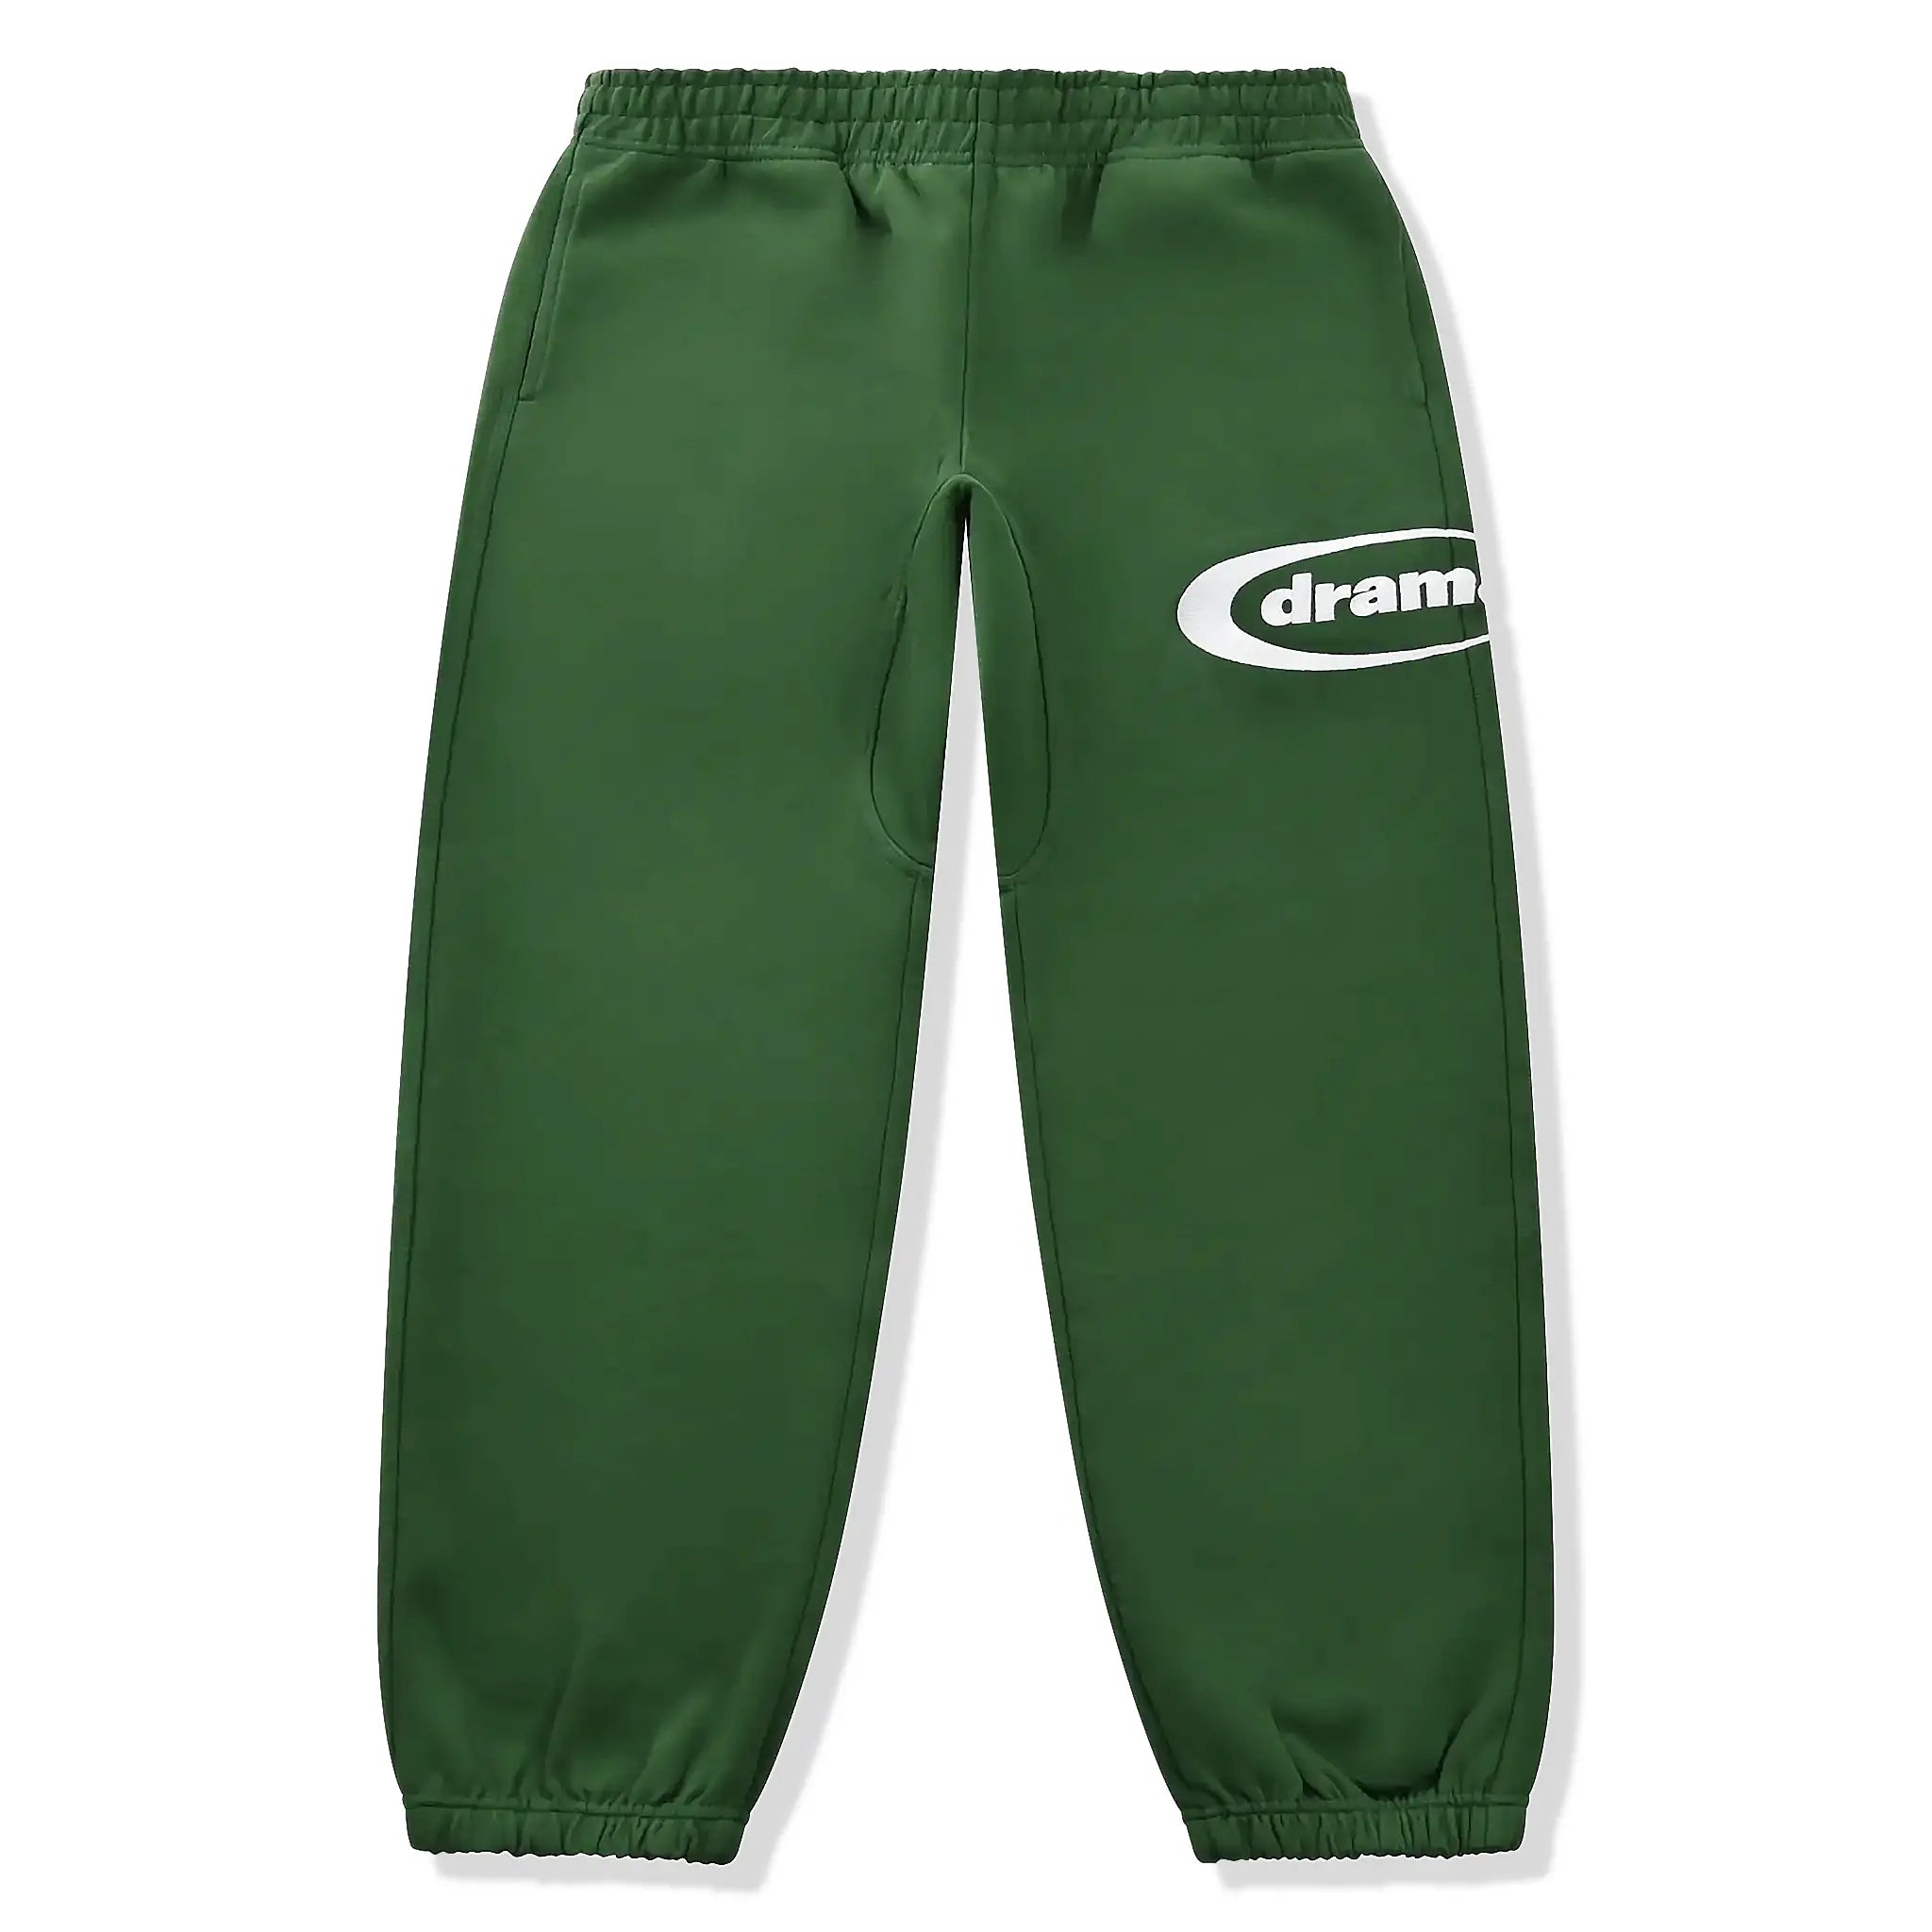 Front view of Drama Call Green White Sweatpants